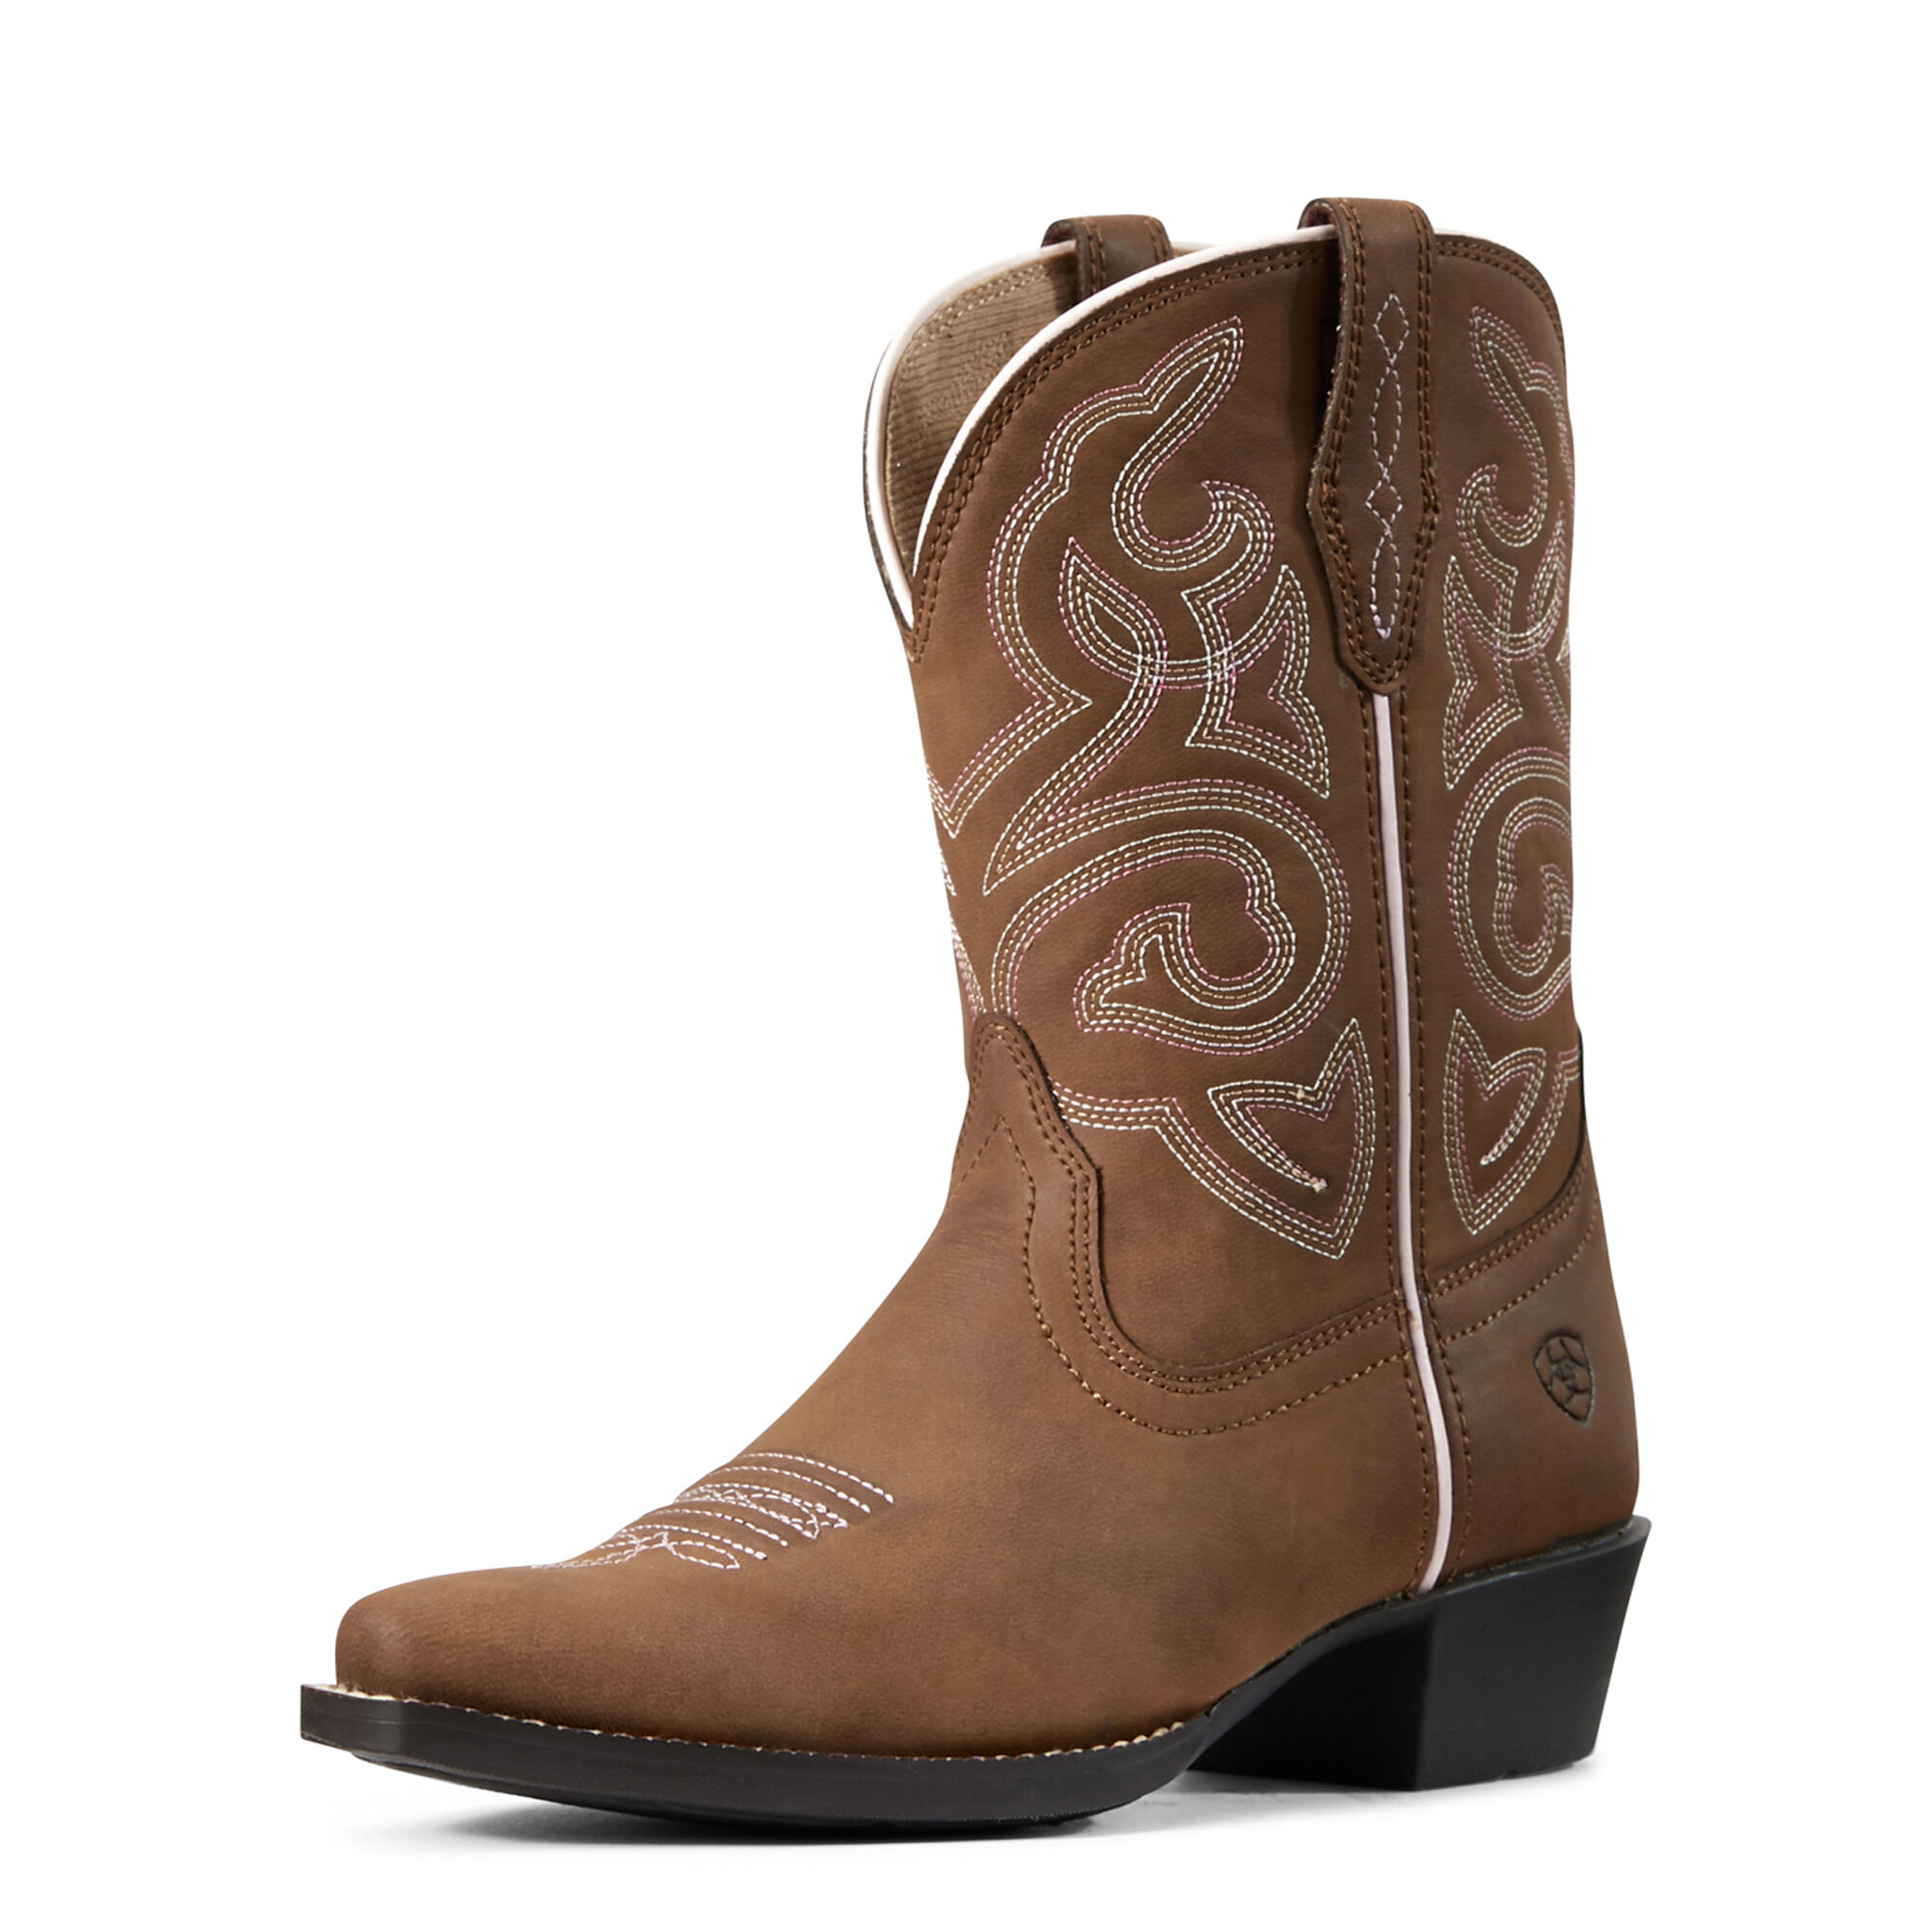 Ariat Girls 4LR Western Boots Shoes Girls Shoes Boots 